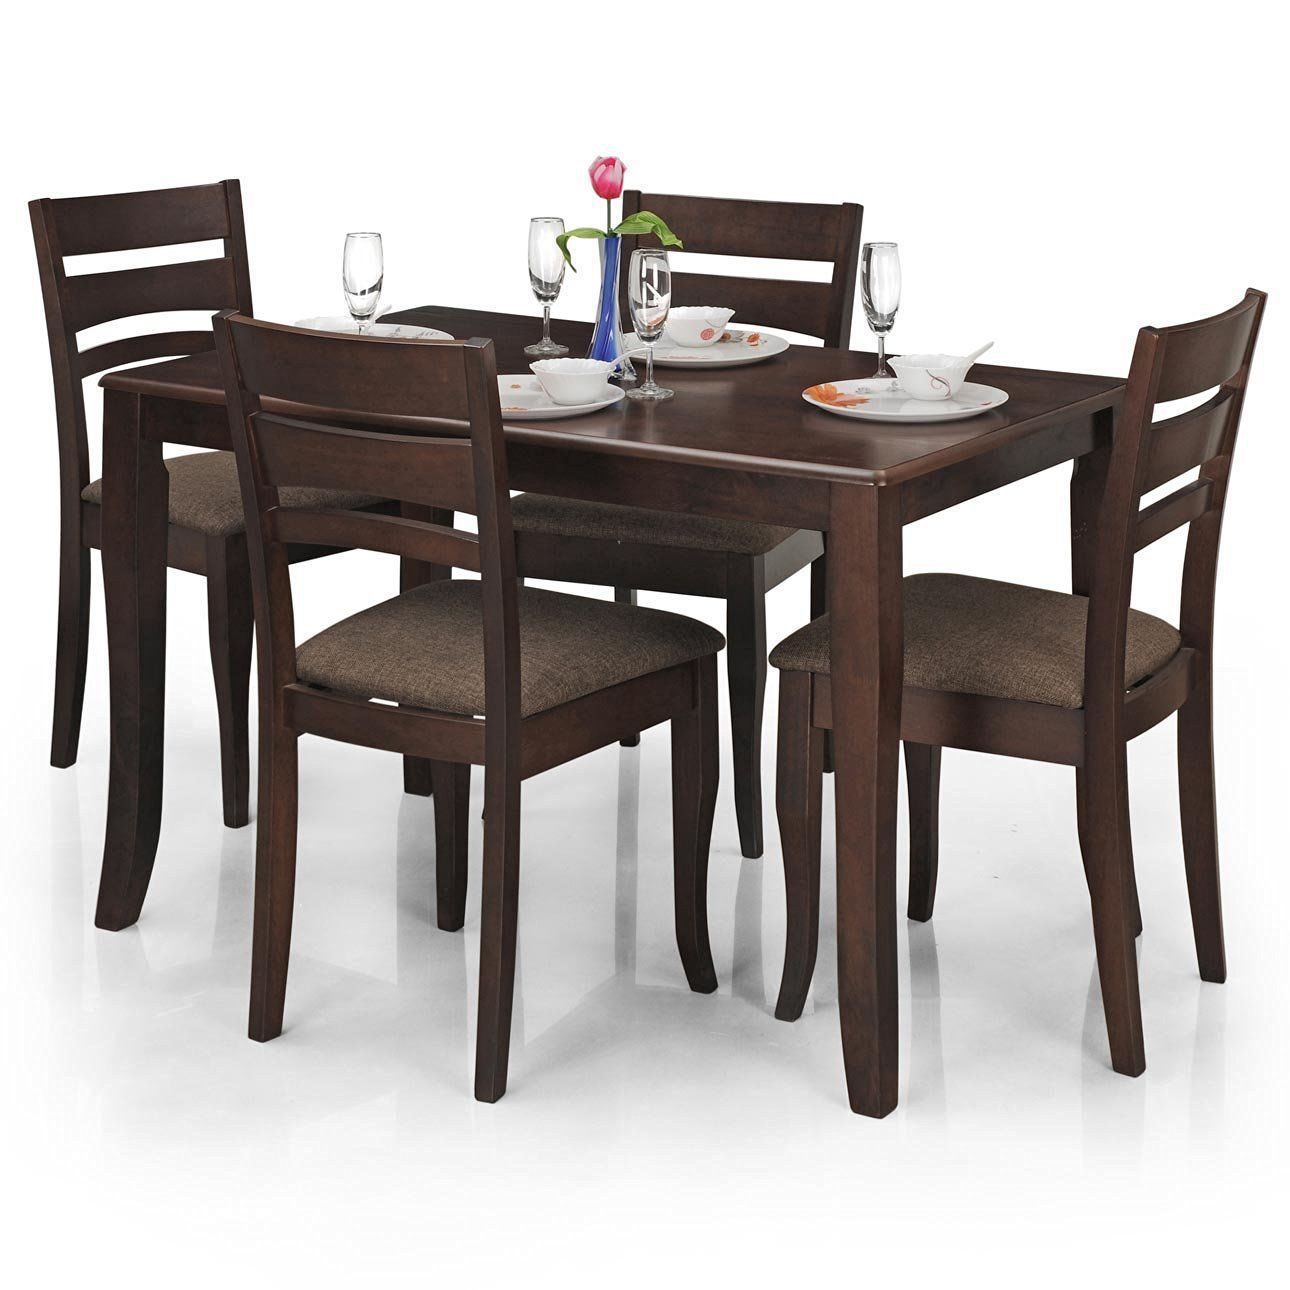 Stylish Dining Table with Four Chairs - Buy Stylish Dining Table with